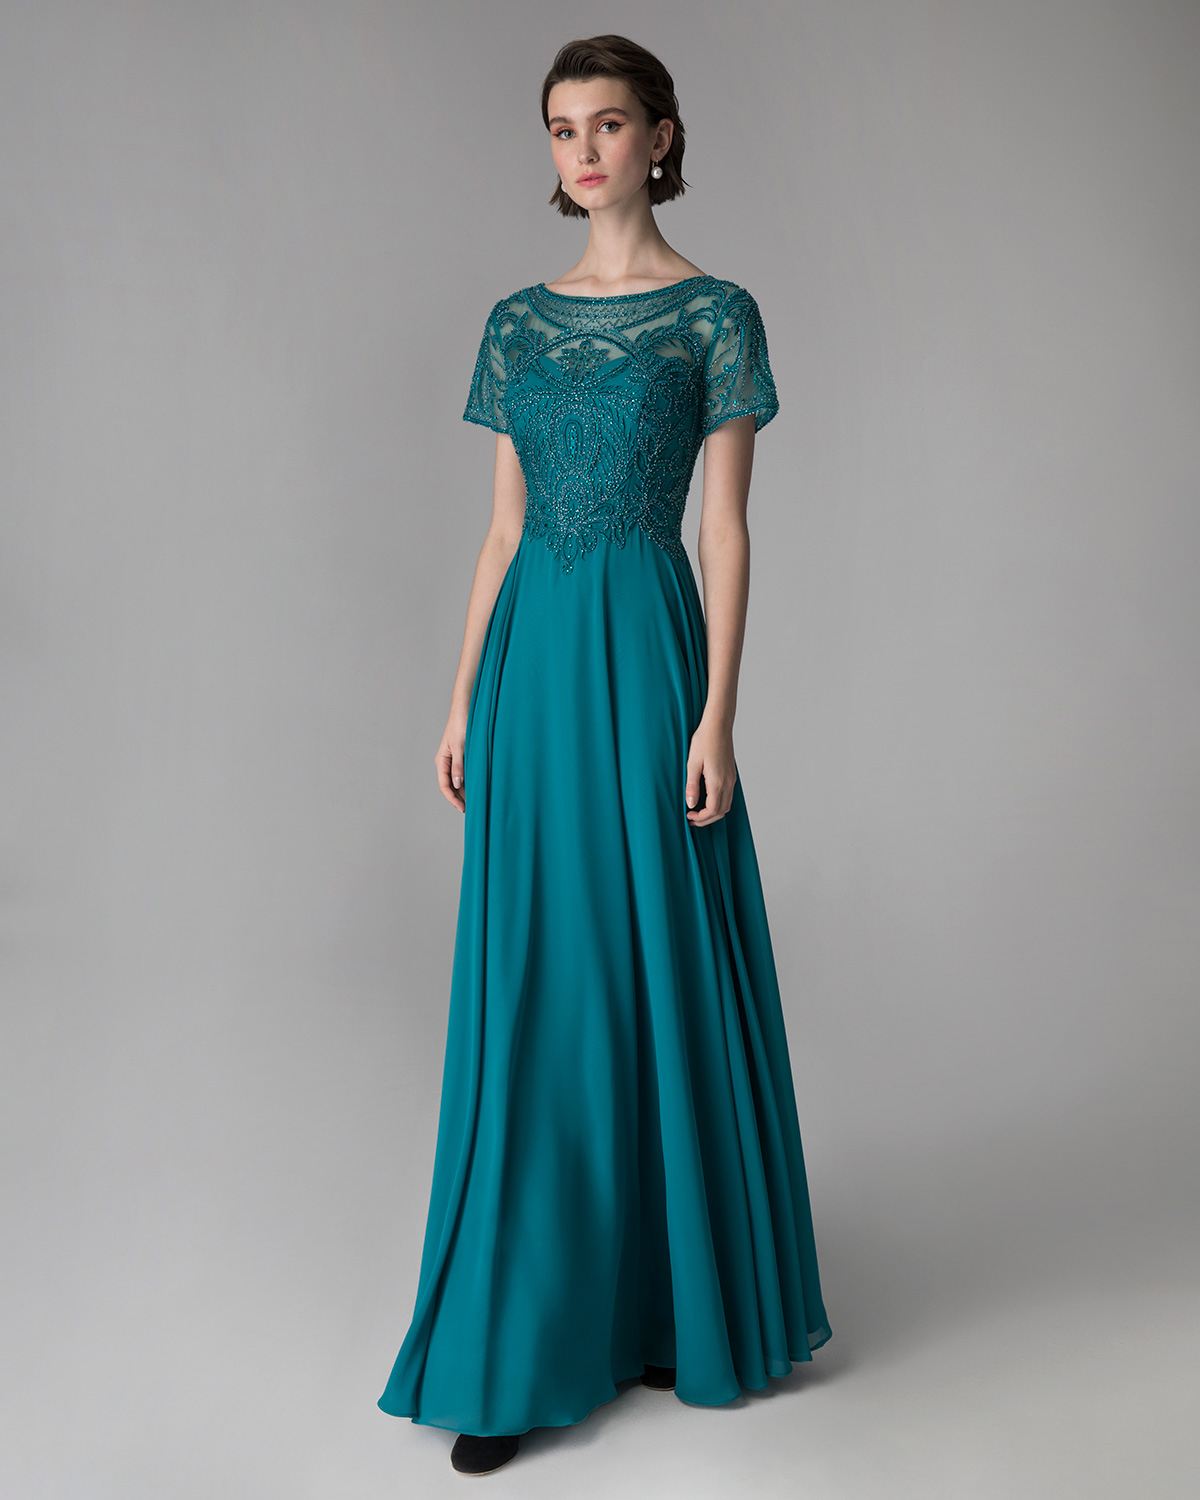 Классические платья / Long evening dress for the mother of the bride with fully beaded top and short sleeves